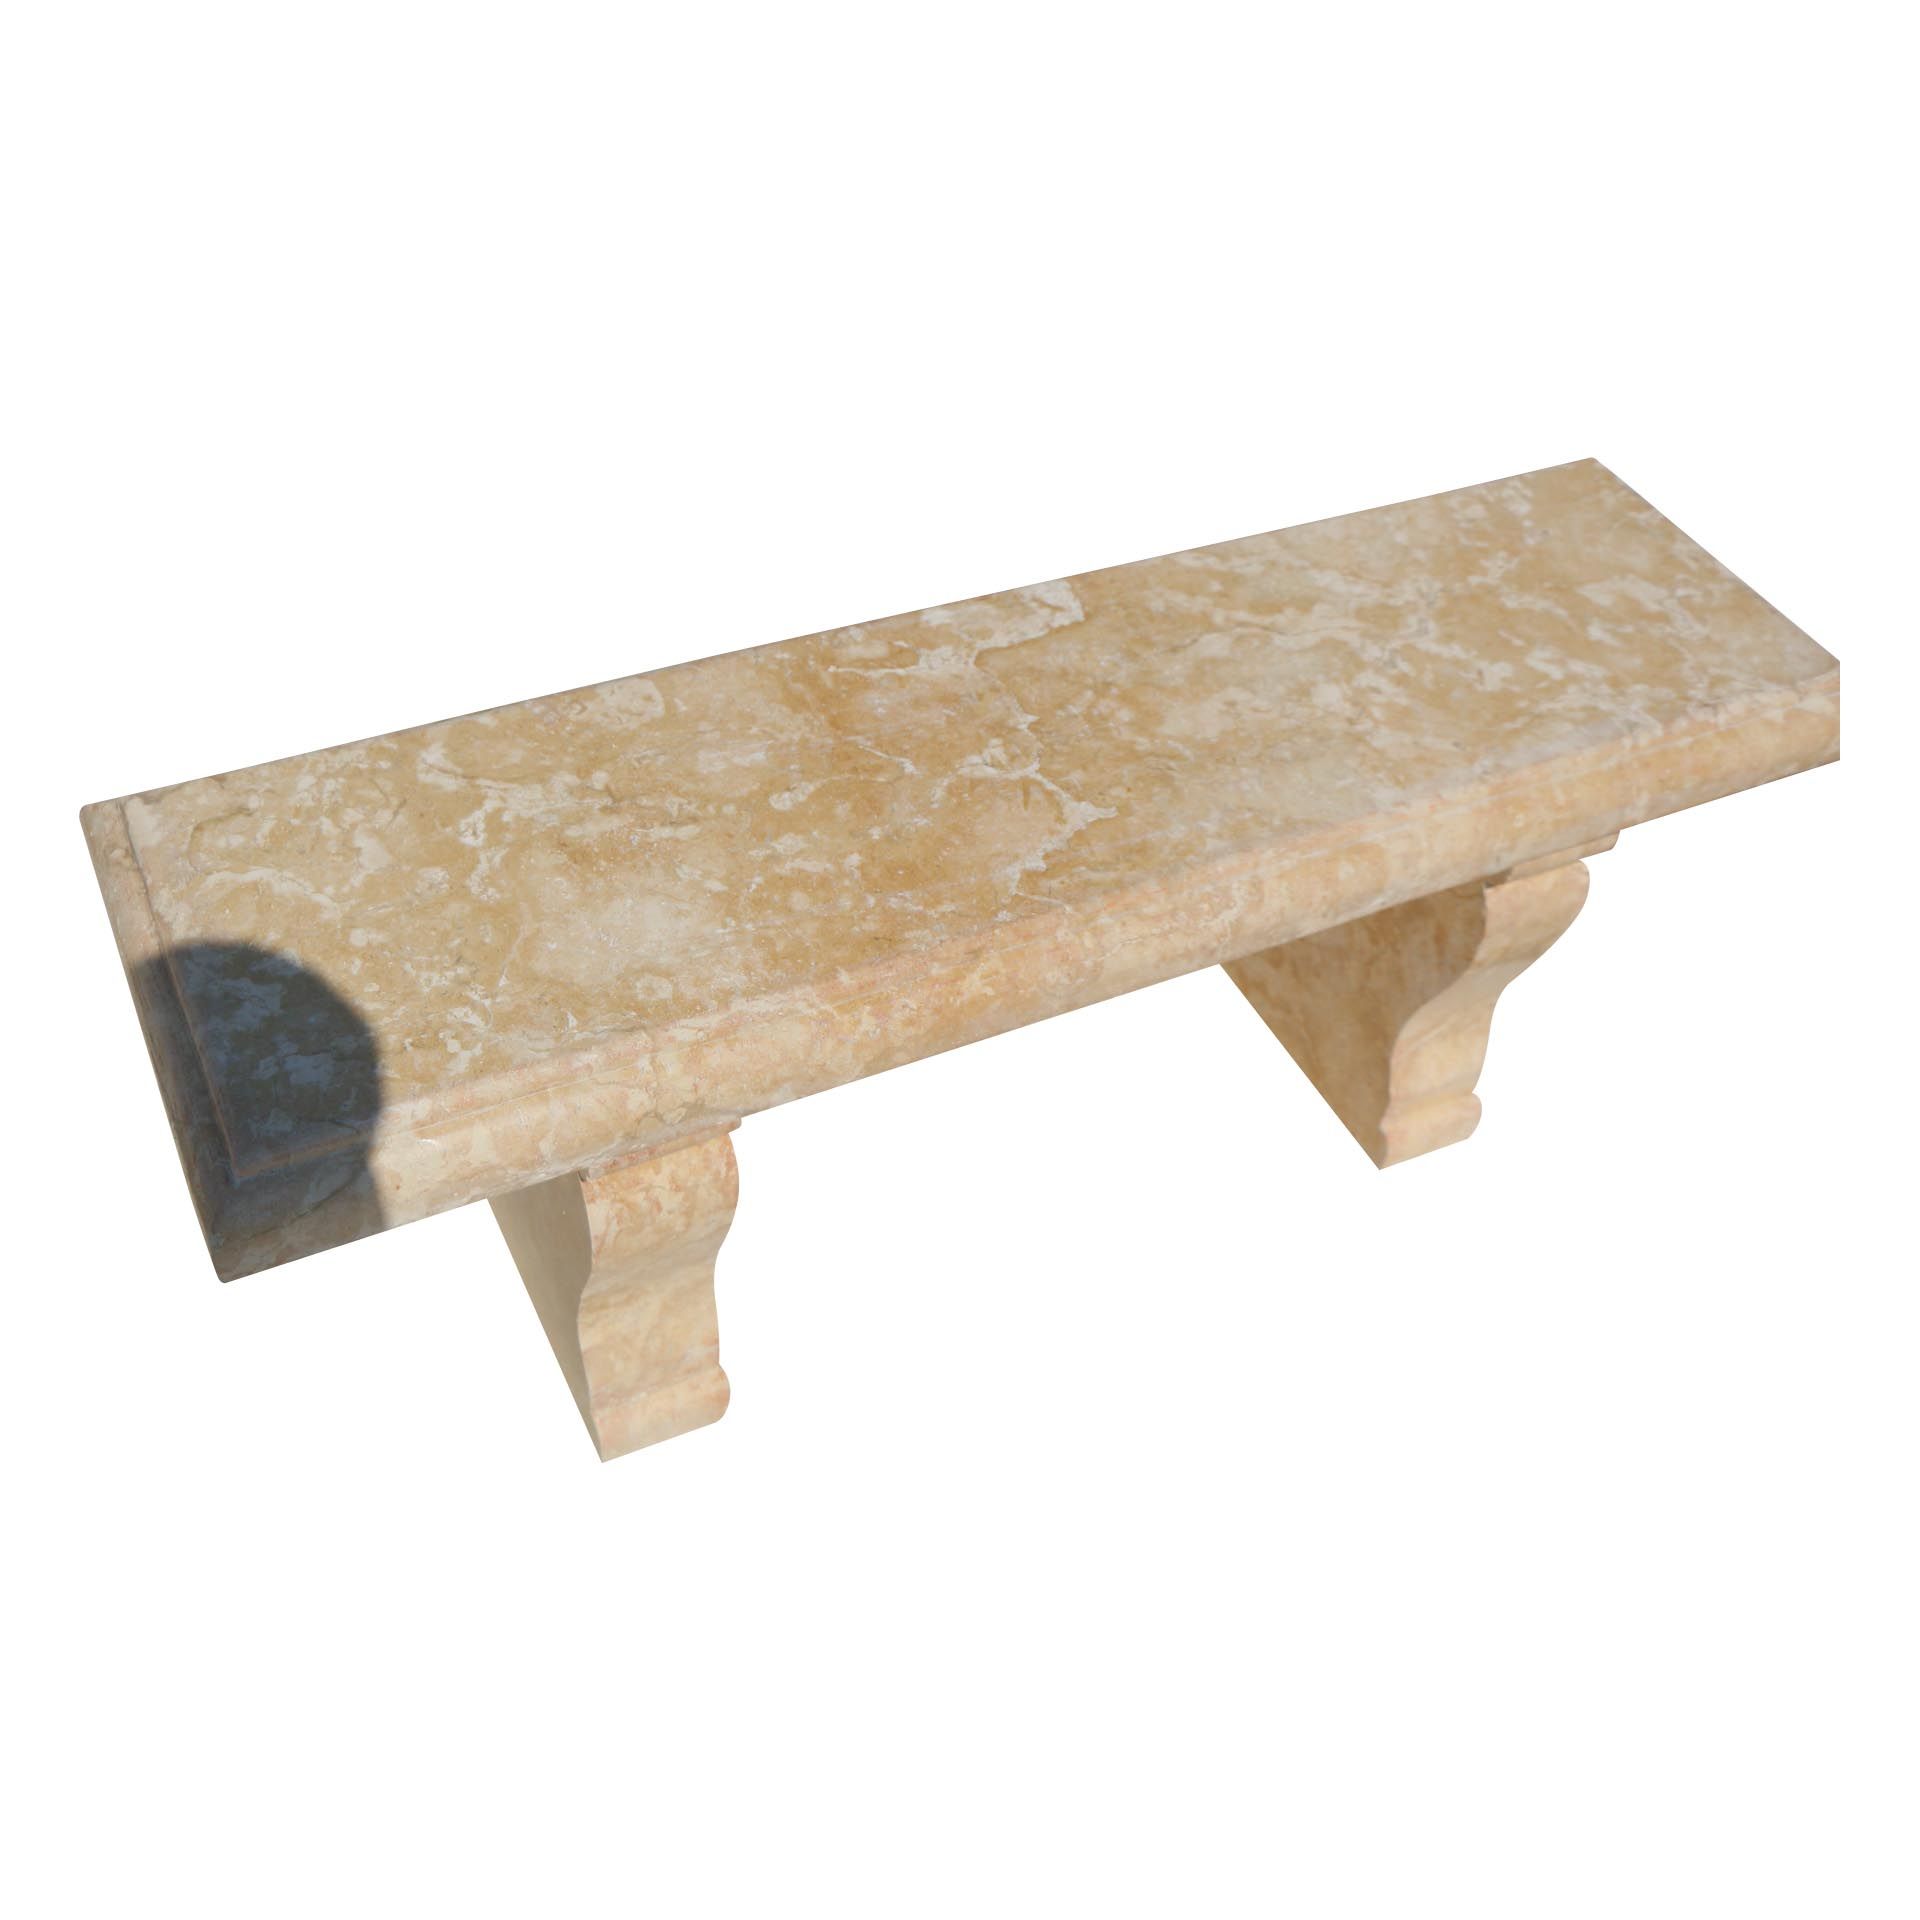 Preferred Yellow Limestone Garden Bench Intended For Manchester Wooden Garden Benches (View 18 of 30)